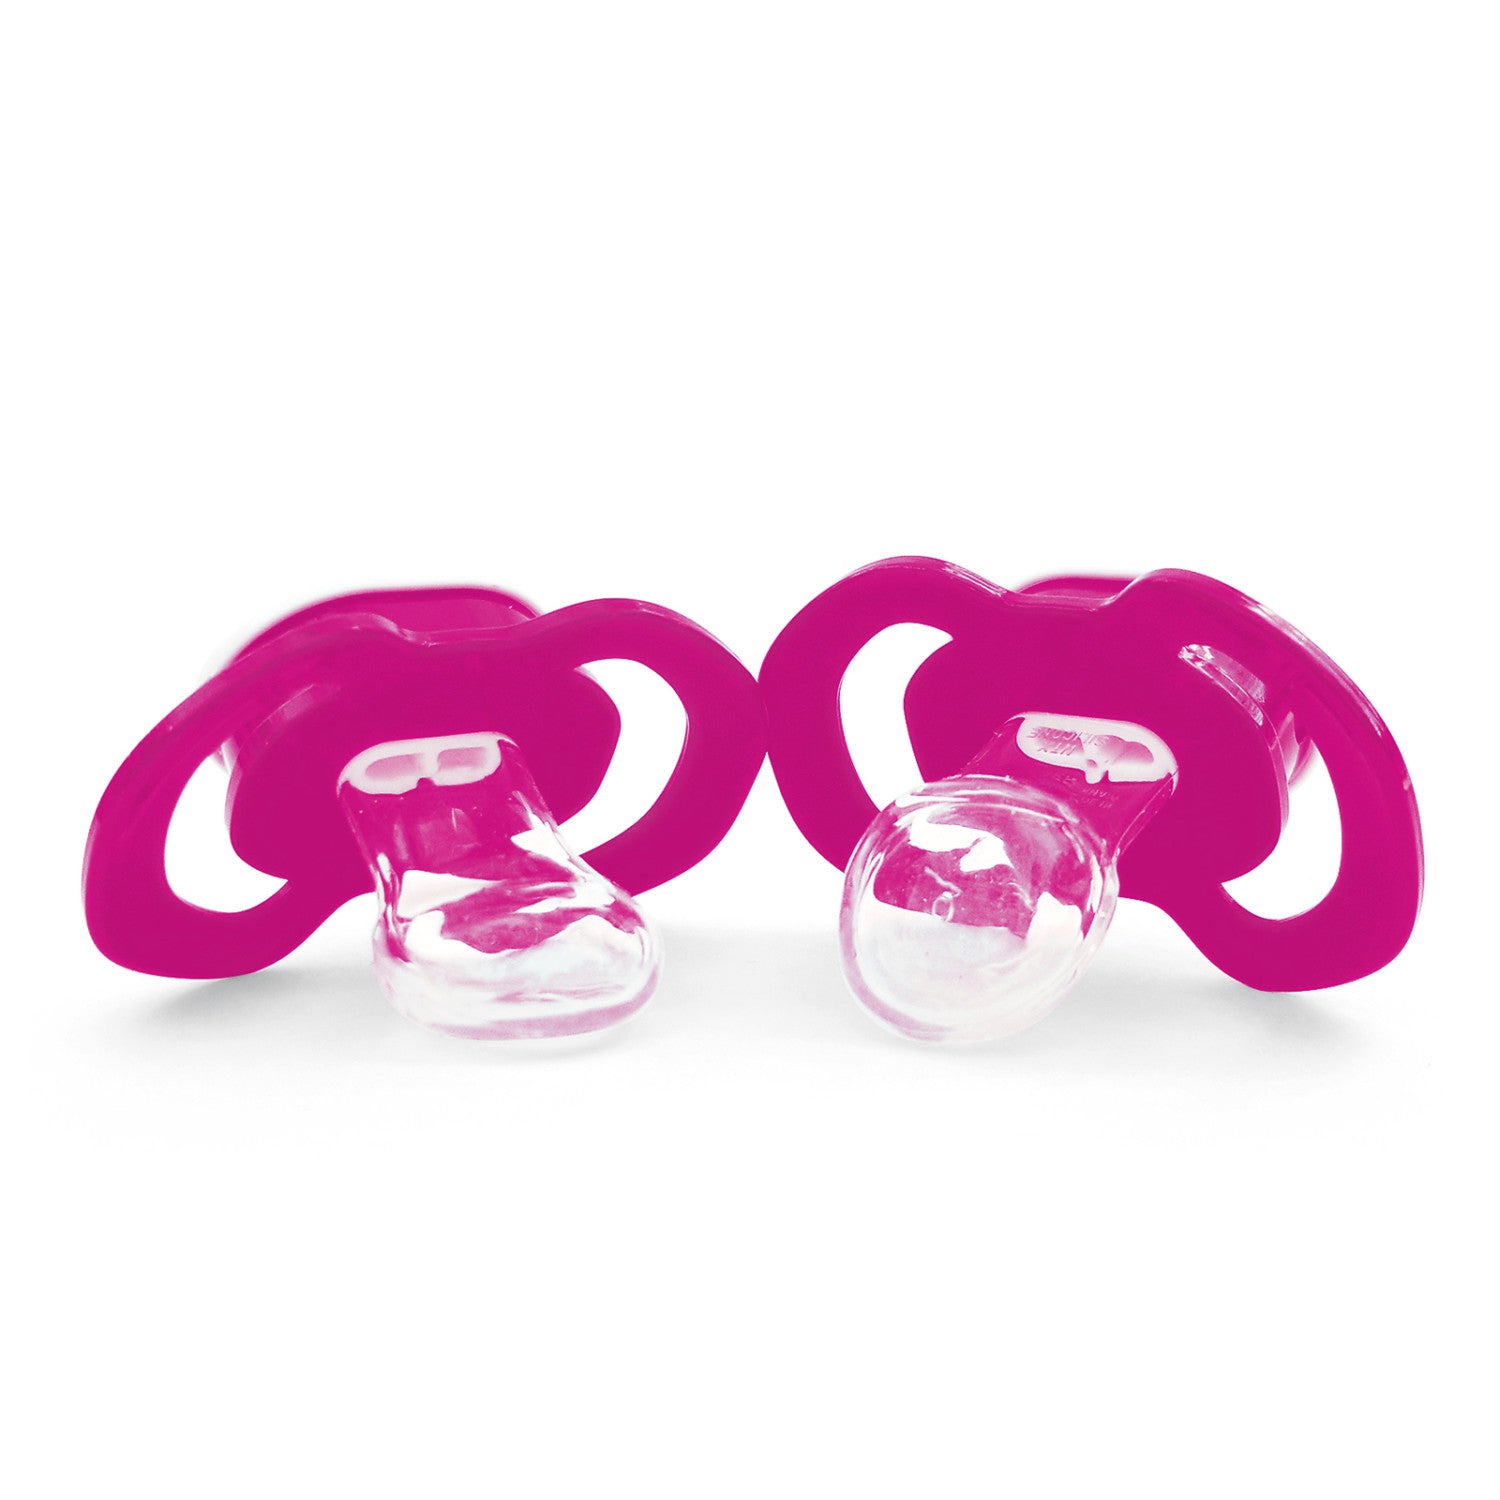 New York Giants NFL Pacifier 2-Pack - Pink